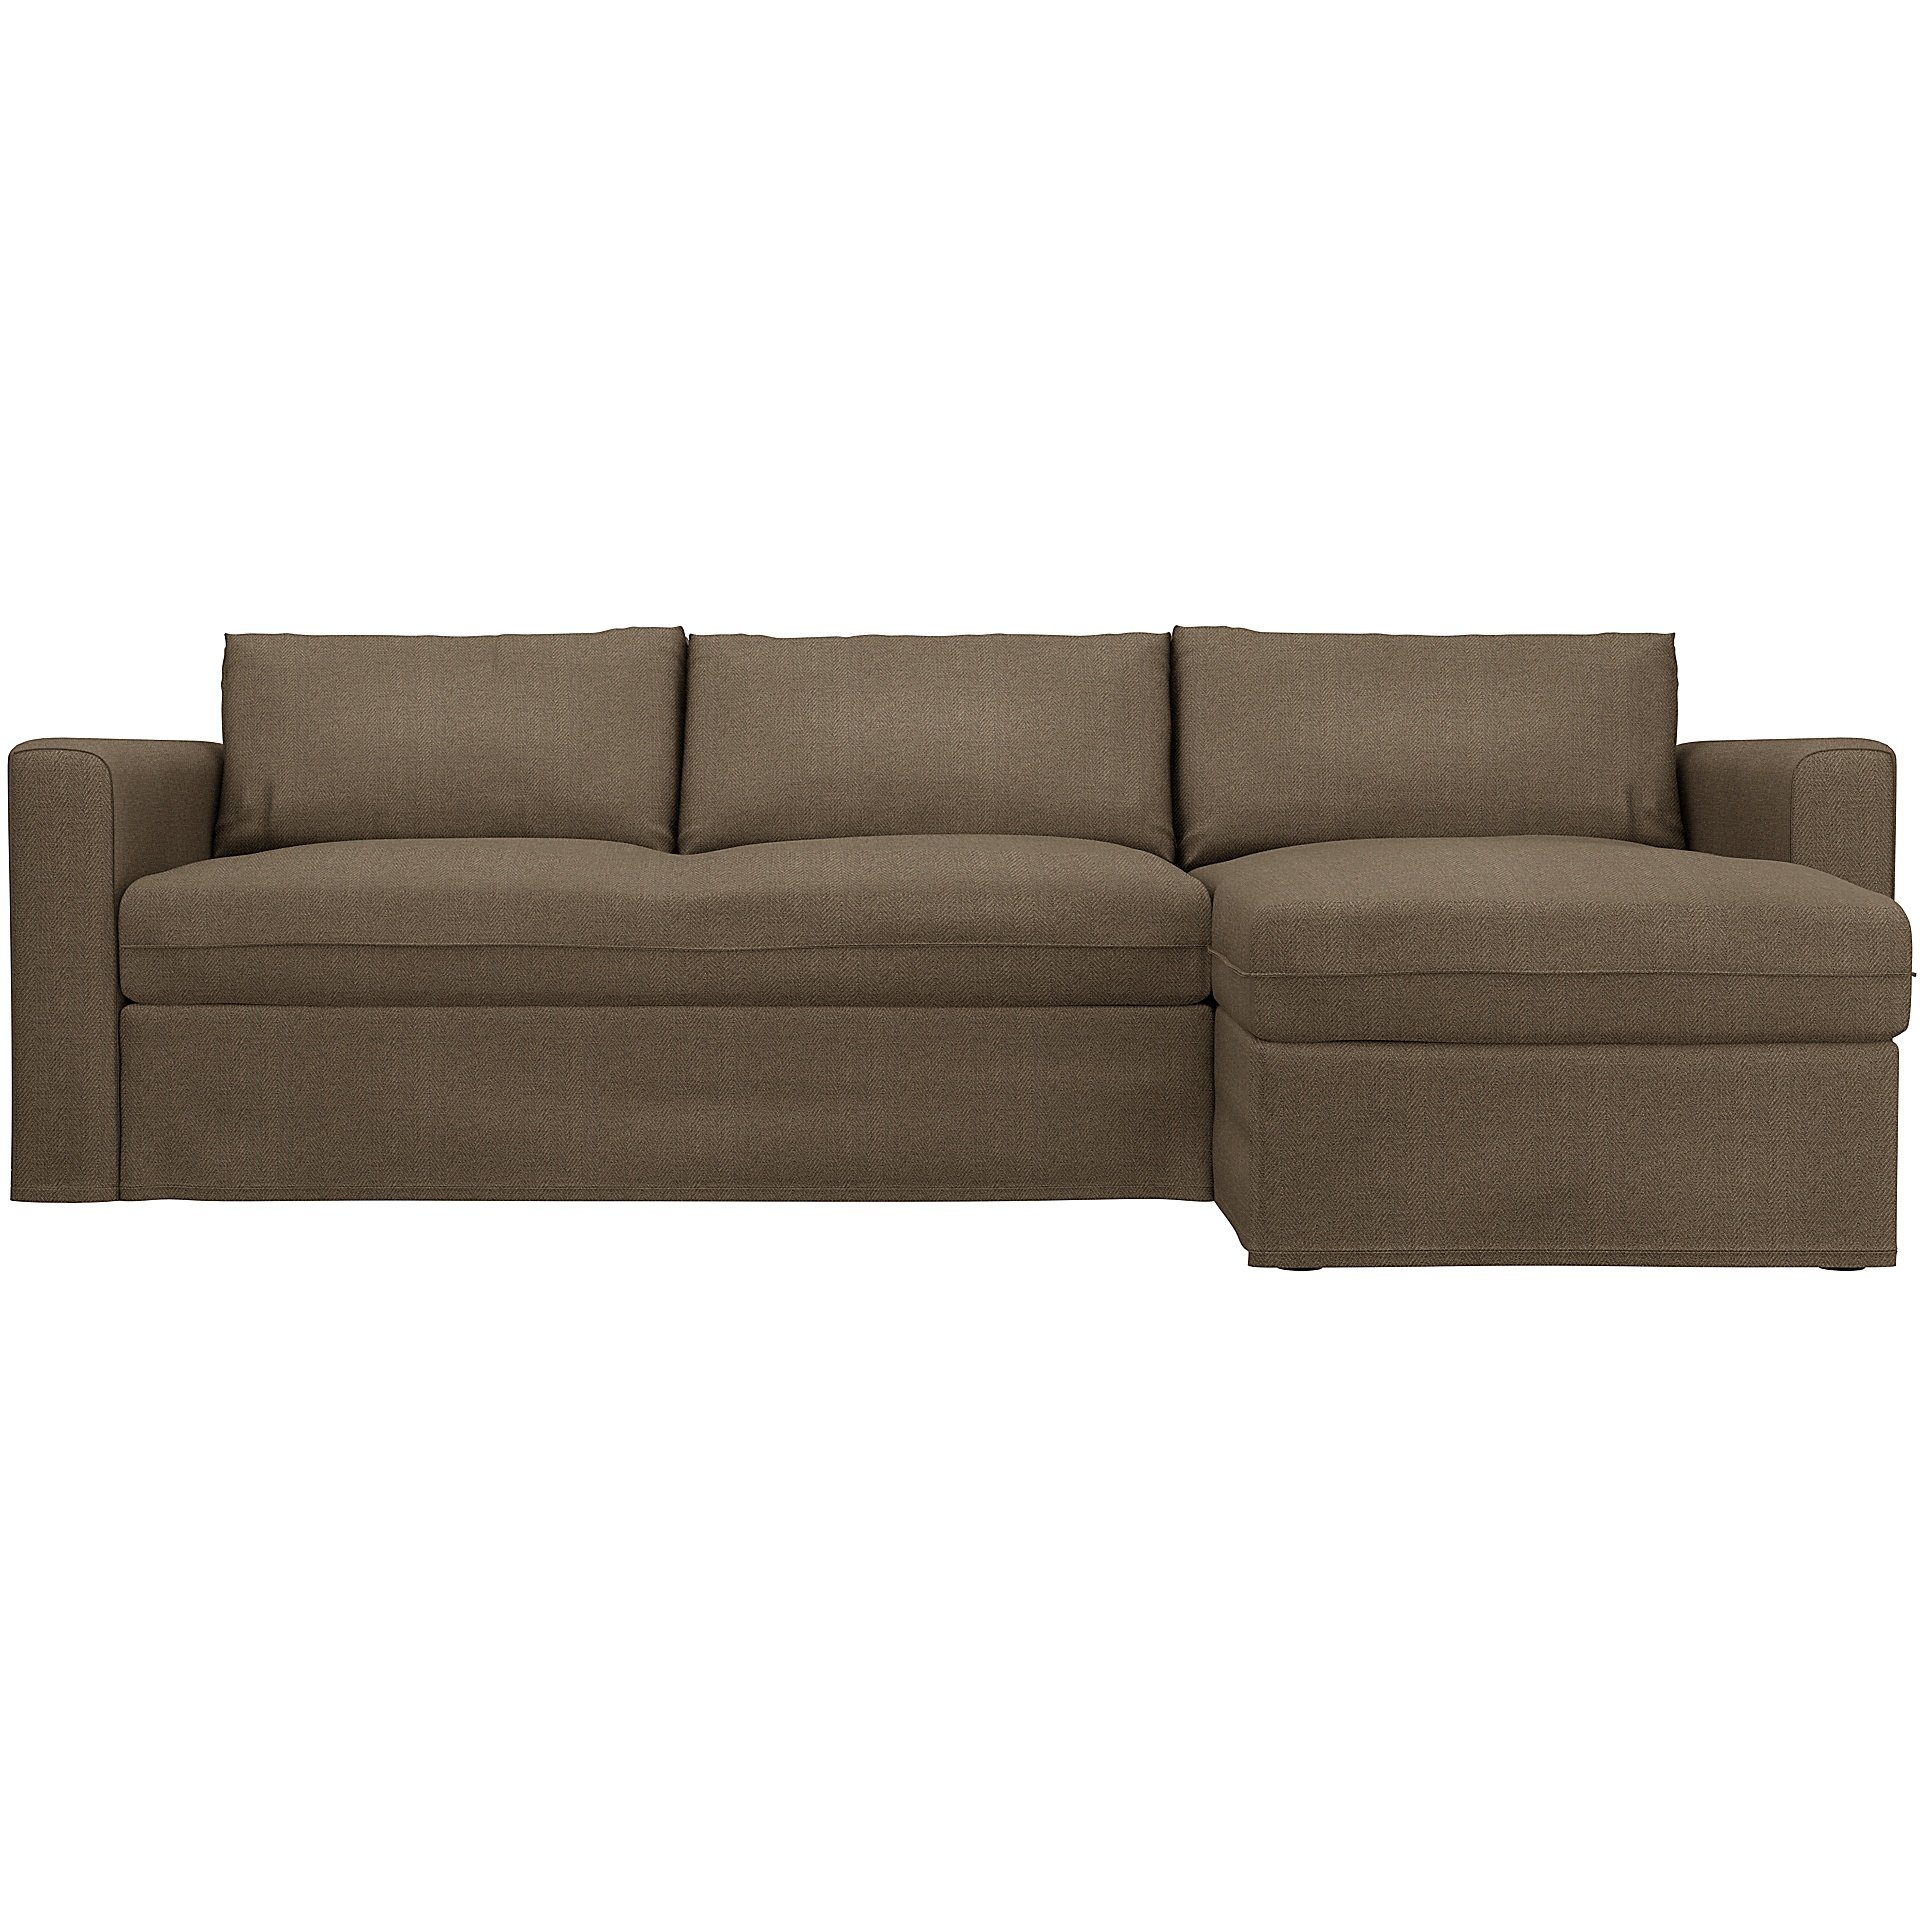 IKEA - Vimle 3 seater with chaise longue cover, Dark Taupe, Boucle & Texture - Bemz